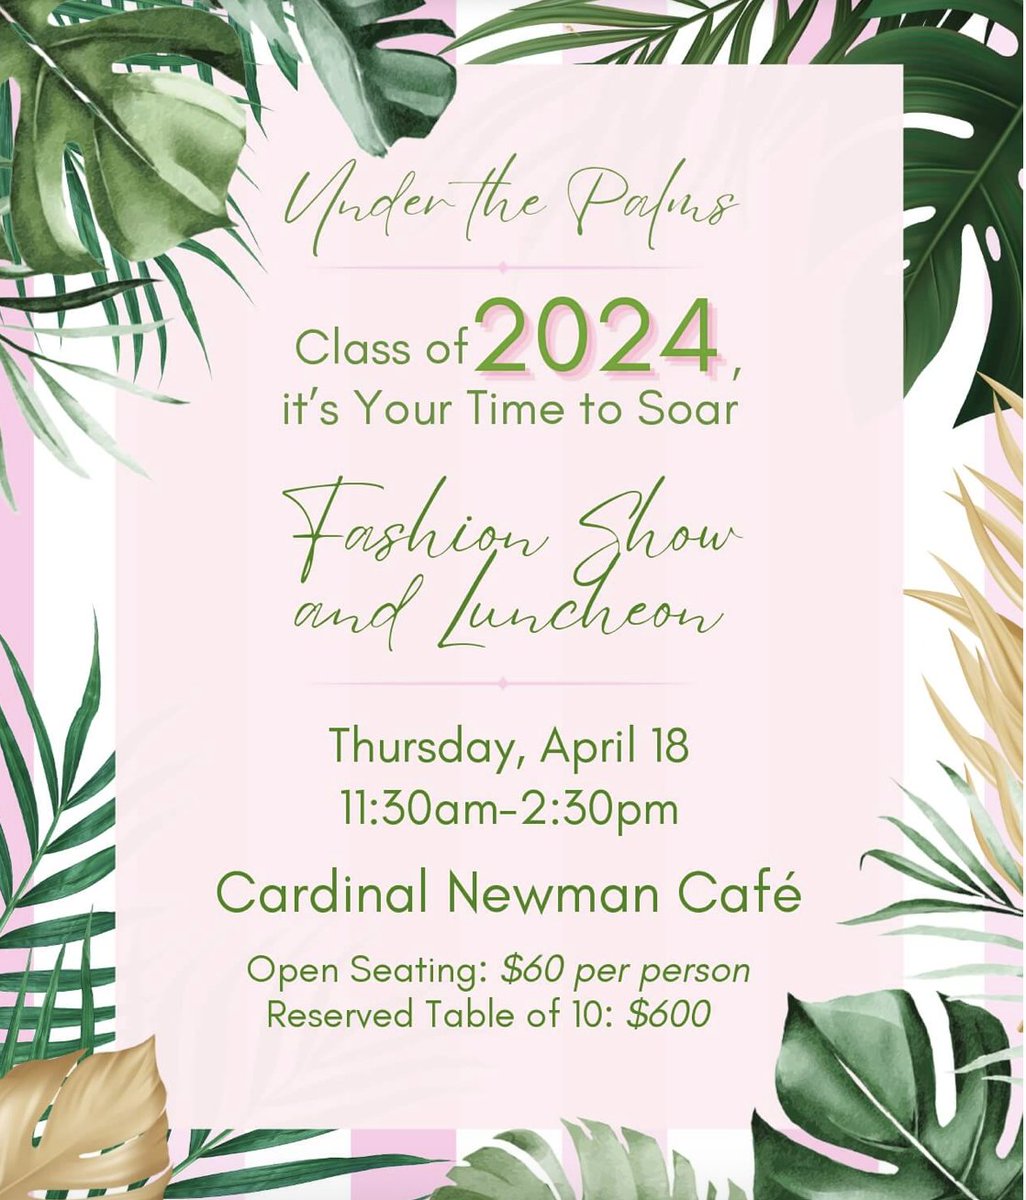 Don't miss the Annual Senior Fashion Show and Luncheon at Cardinal Newman!🎩👗 Thurs., April 18, 11:30am - 2:30pm for an afternoon filled with entertainment and style. Reserve your spot now athttps://cardinalnewman.com/event/class-of-2024-fashion-show-and-luncheon/